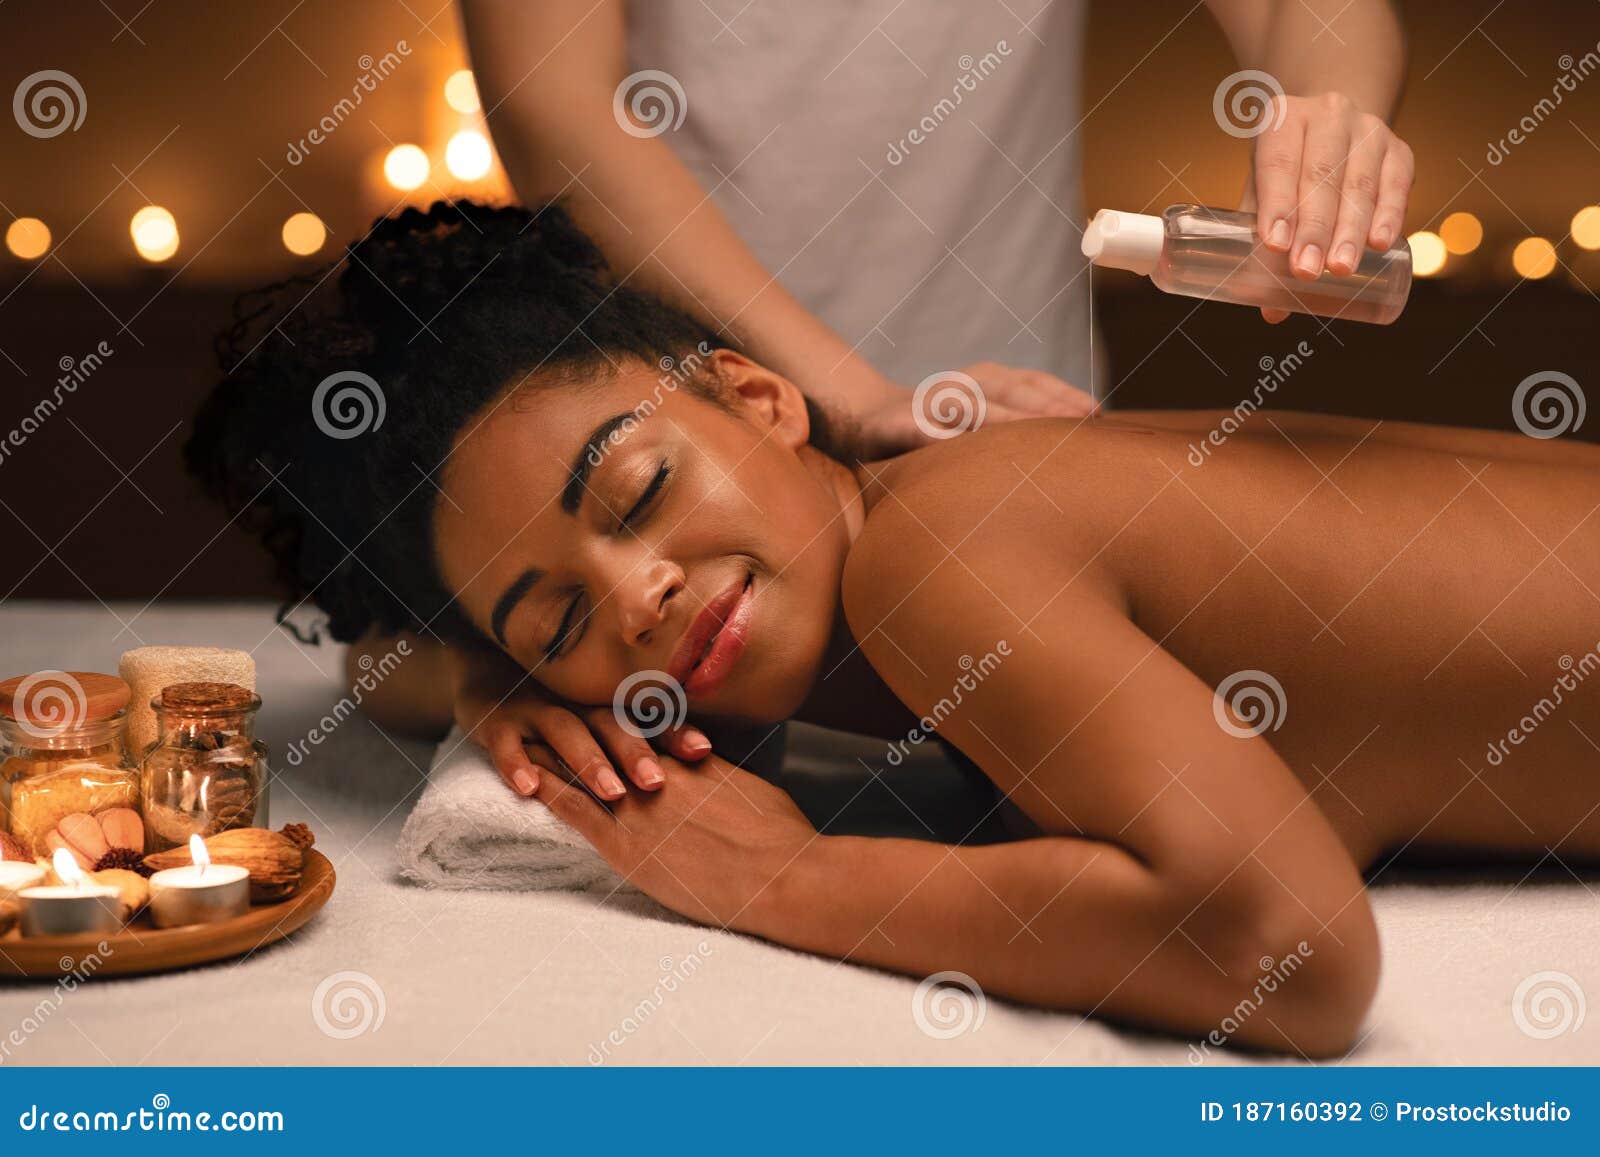 Relaxed African Woman Enjoying Aromatherapy And Massage At Spa Stock